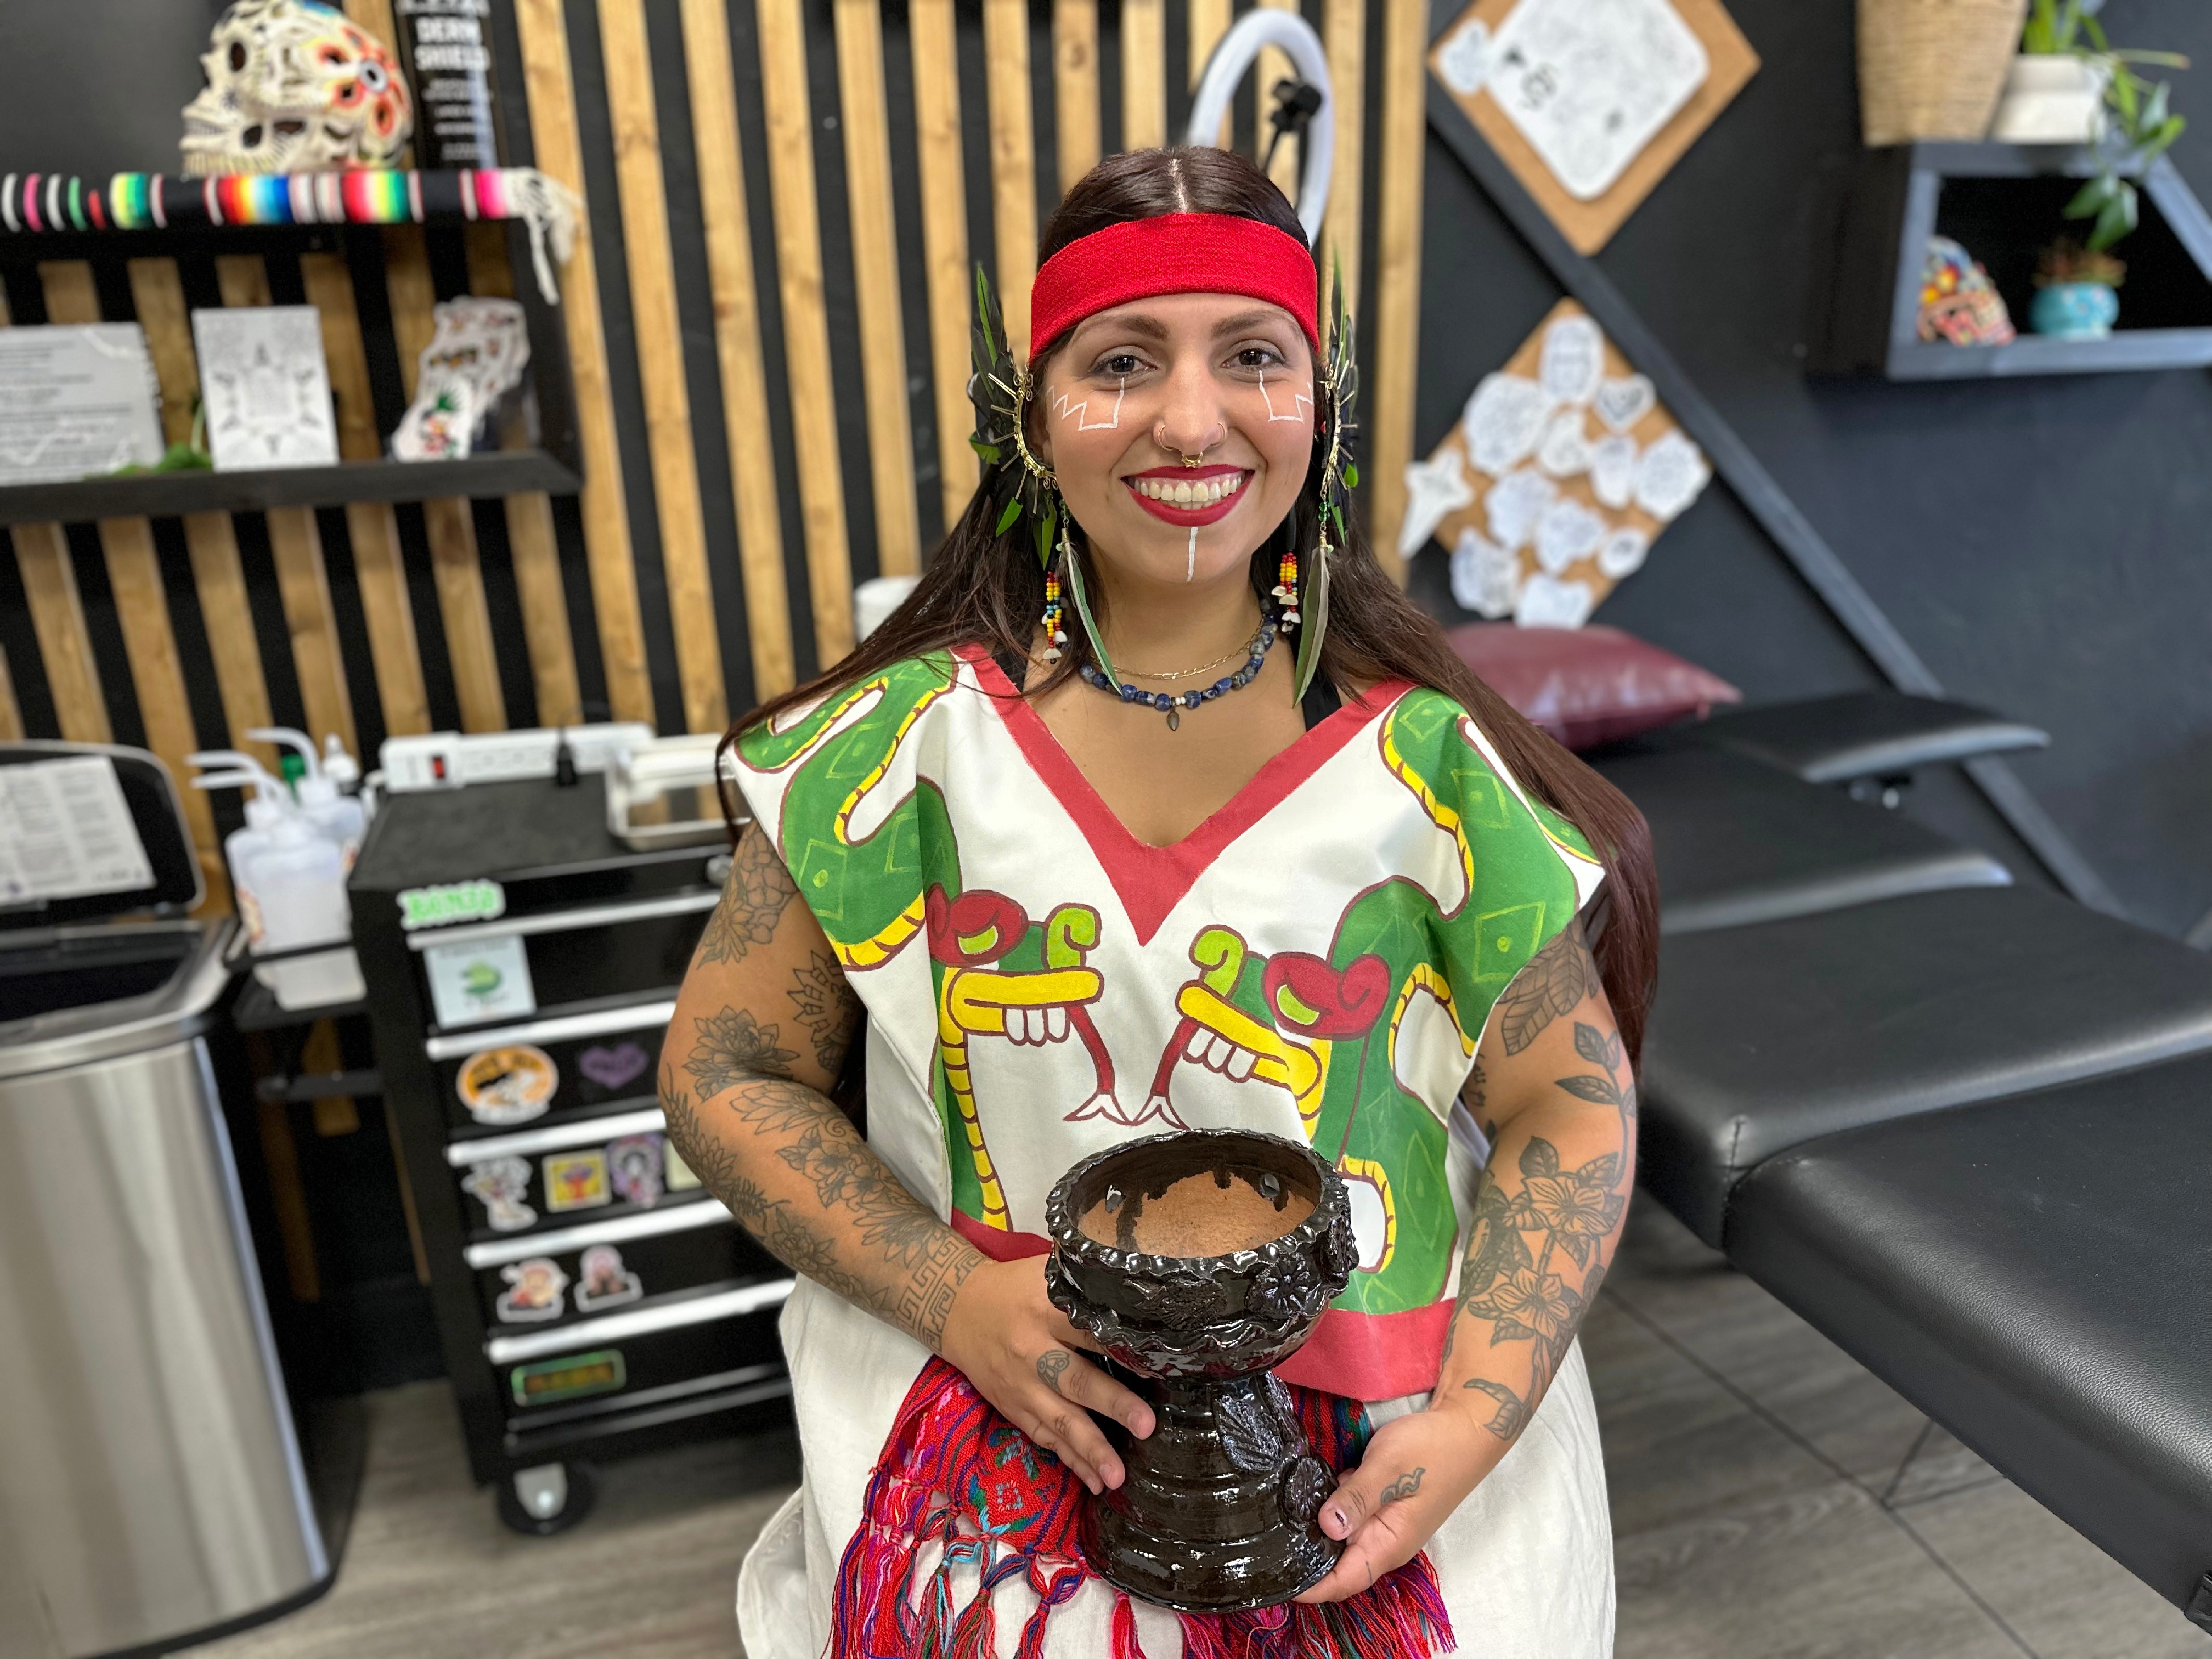 Soy Artista: local tattoo artist paves her own path